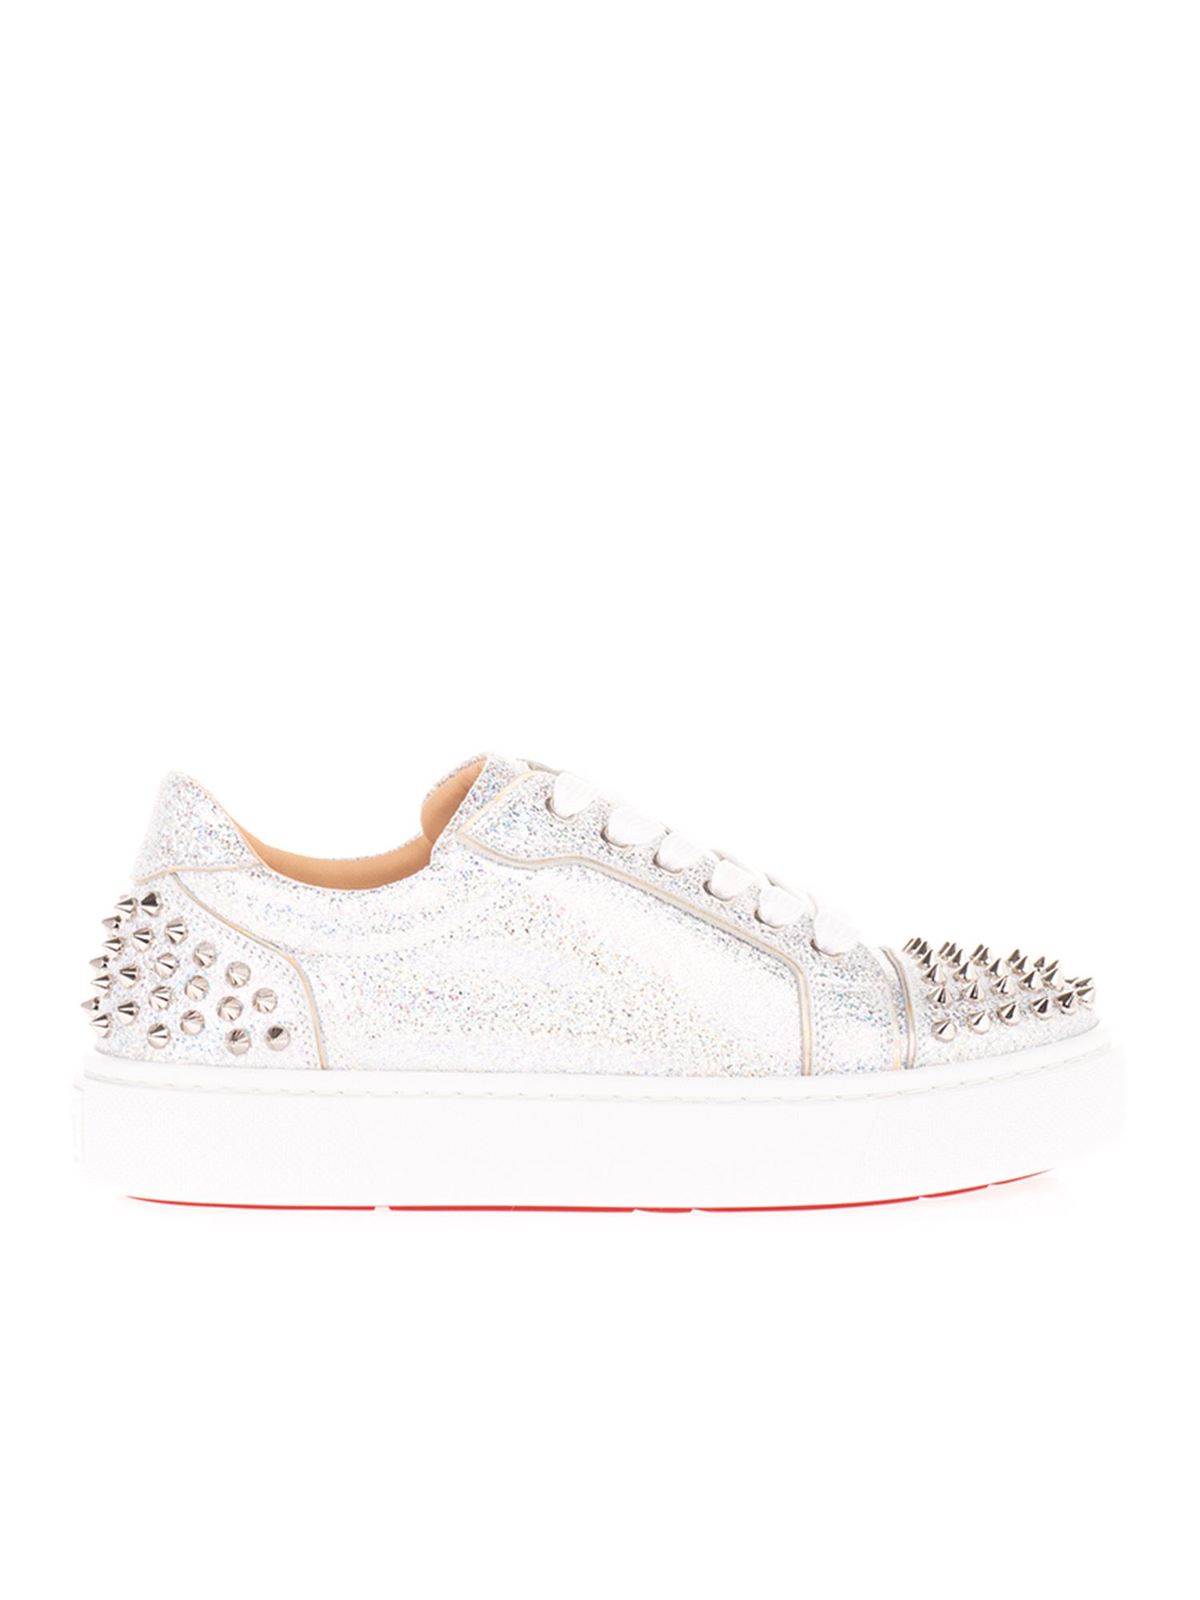 Trainers Christian Louboutin - Glittered sneakers with studs - 3200159W129